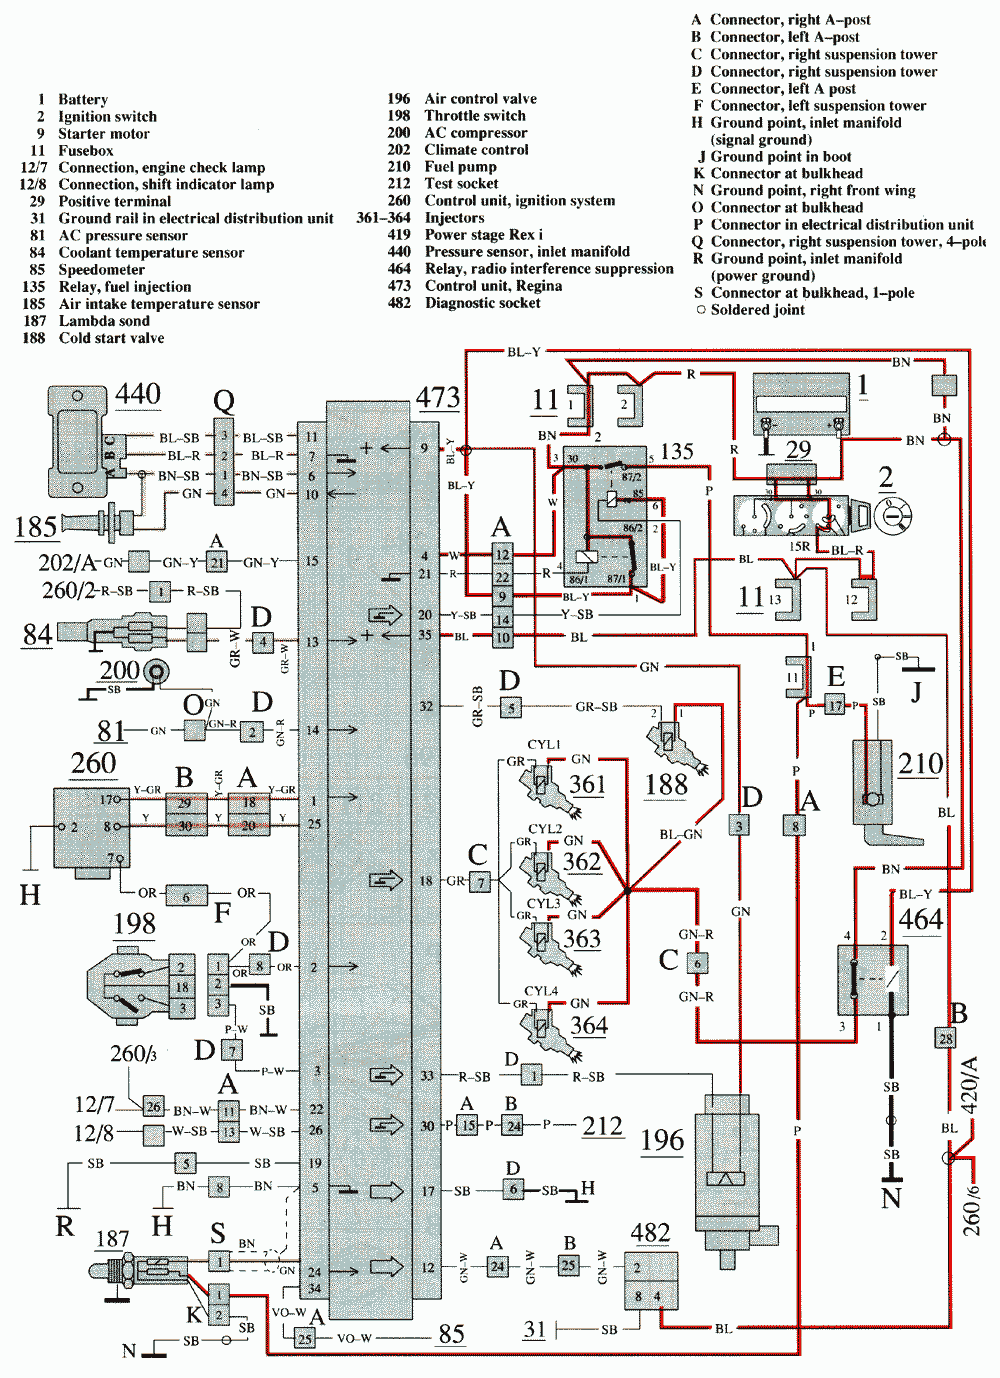 VOLVO 740 1989 - wiring diagrams